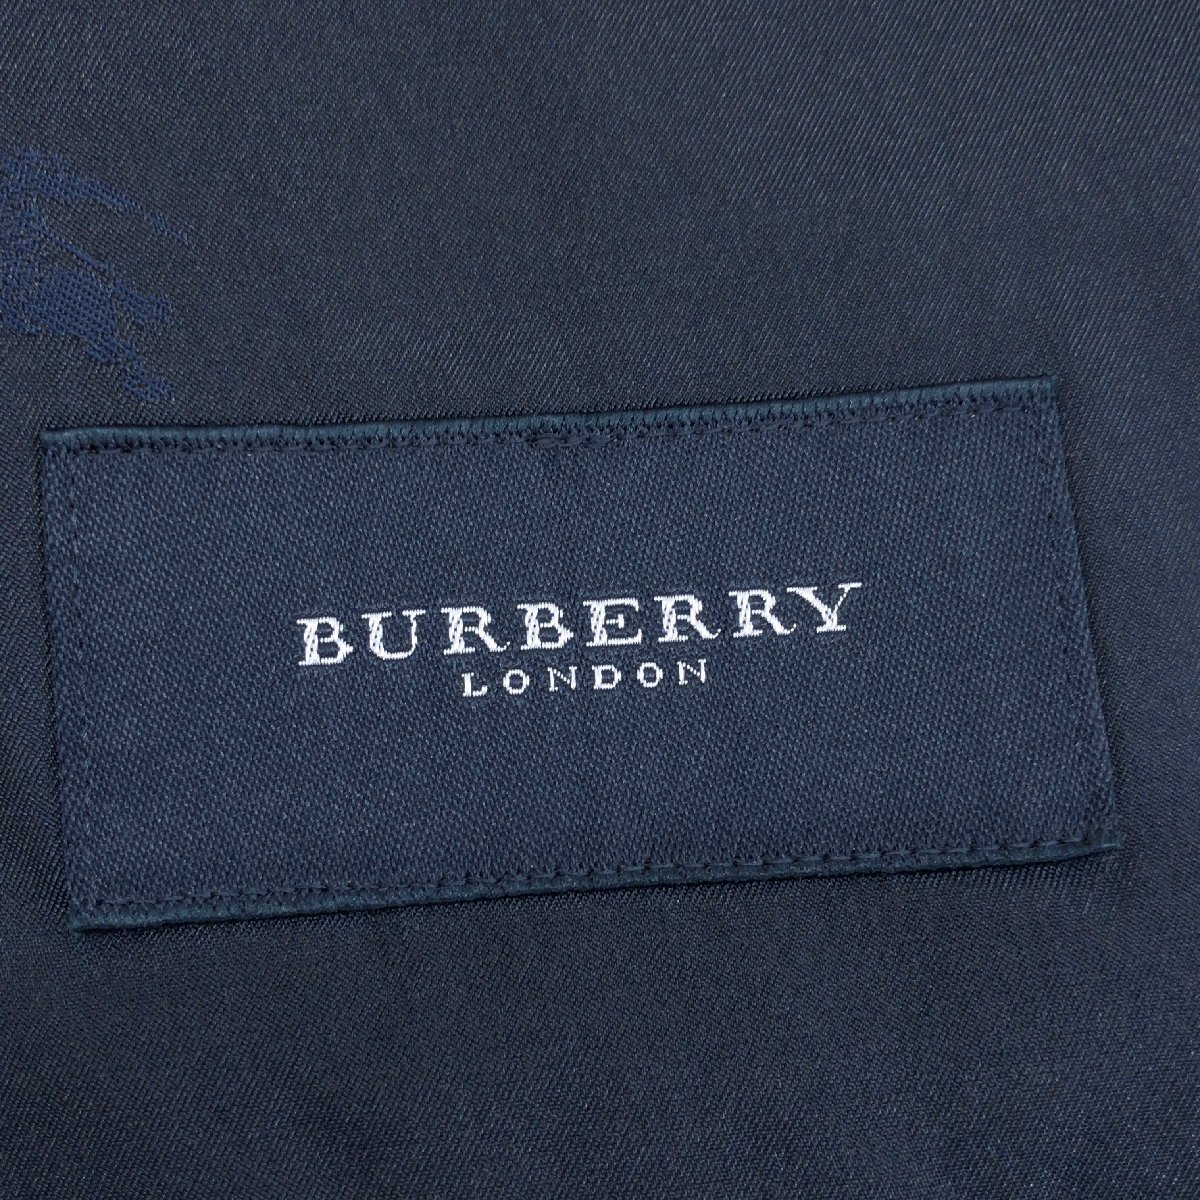 *BURBERRY LONDON Burberry London gold button moheya.b leather jacket AB5(L corresponding ) dark blue tailored jacket navy blue blur . thing made in Japan 